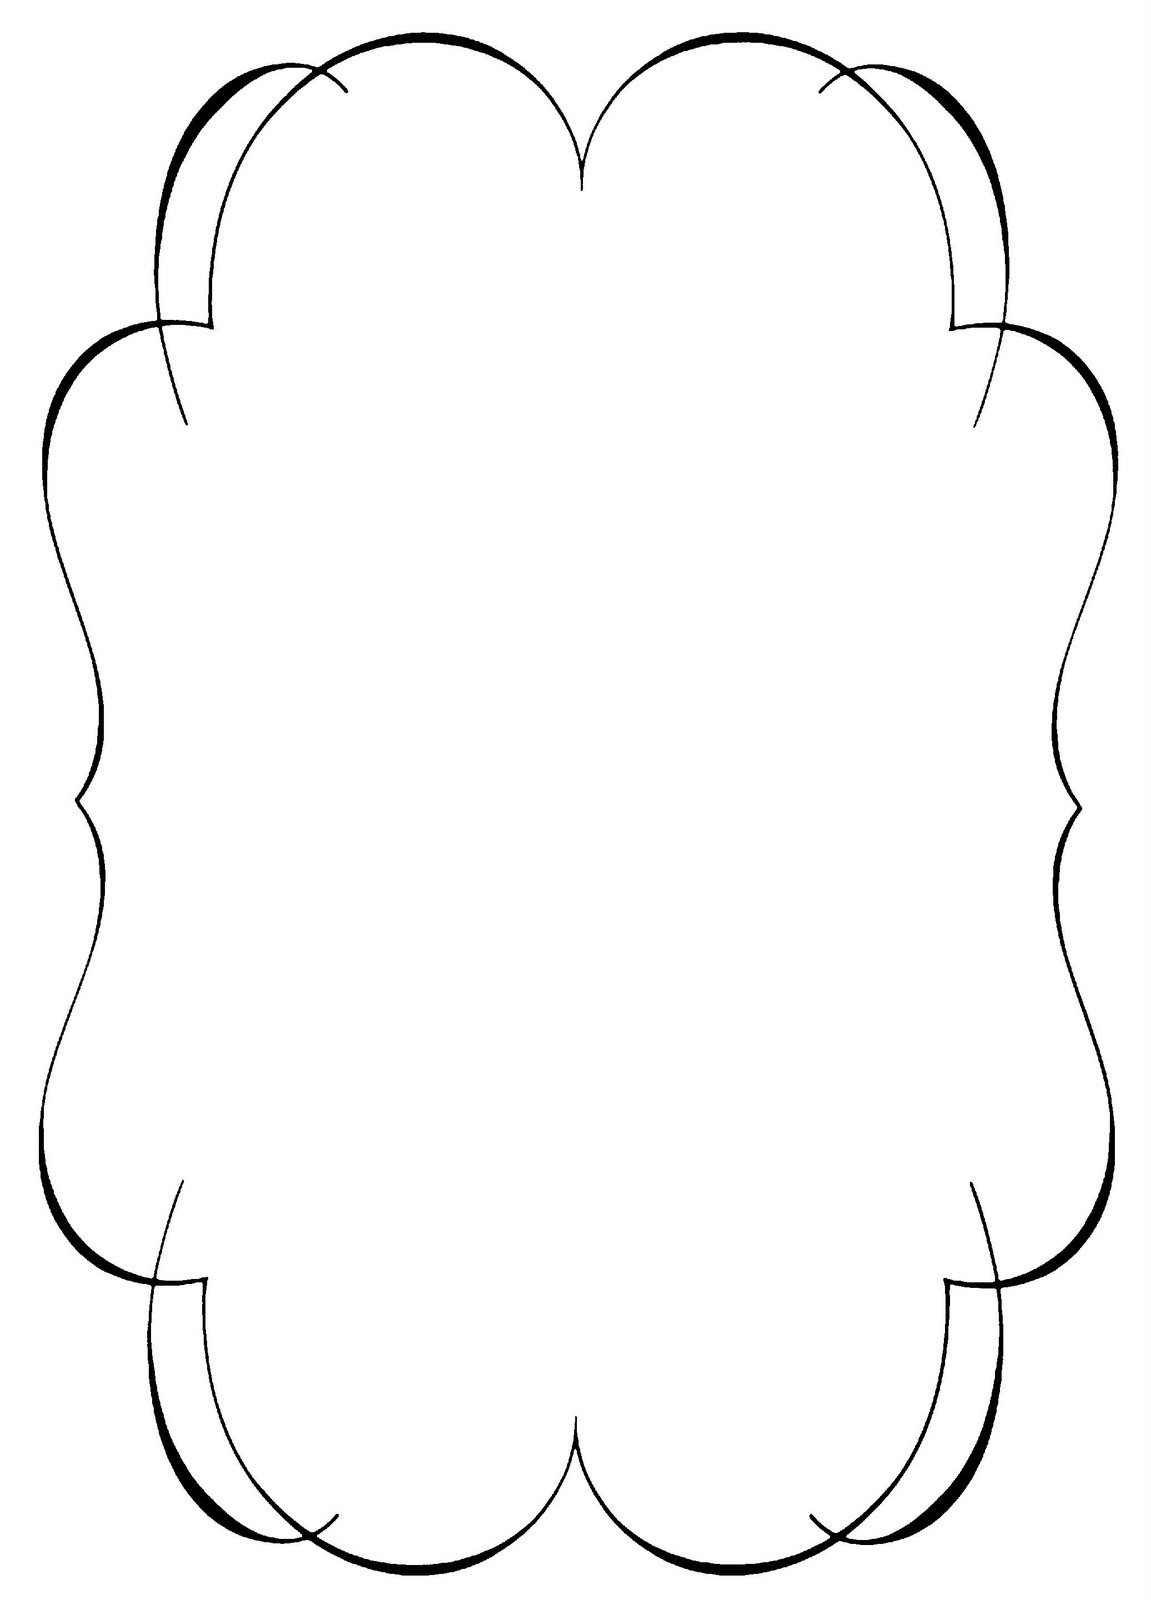 Bracket Frame Clipart Free   Clipart Panda   Free Clipart Images